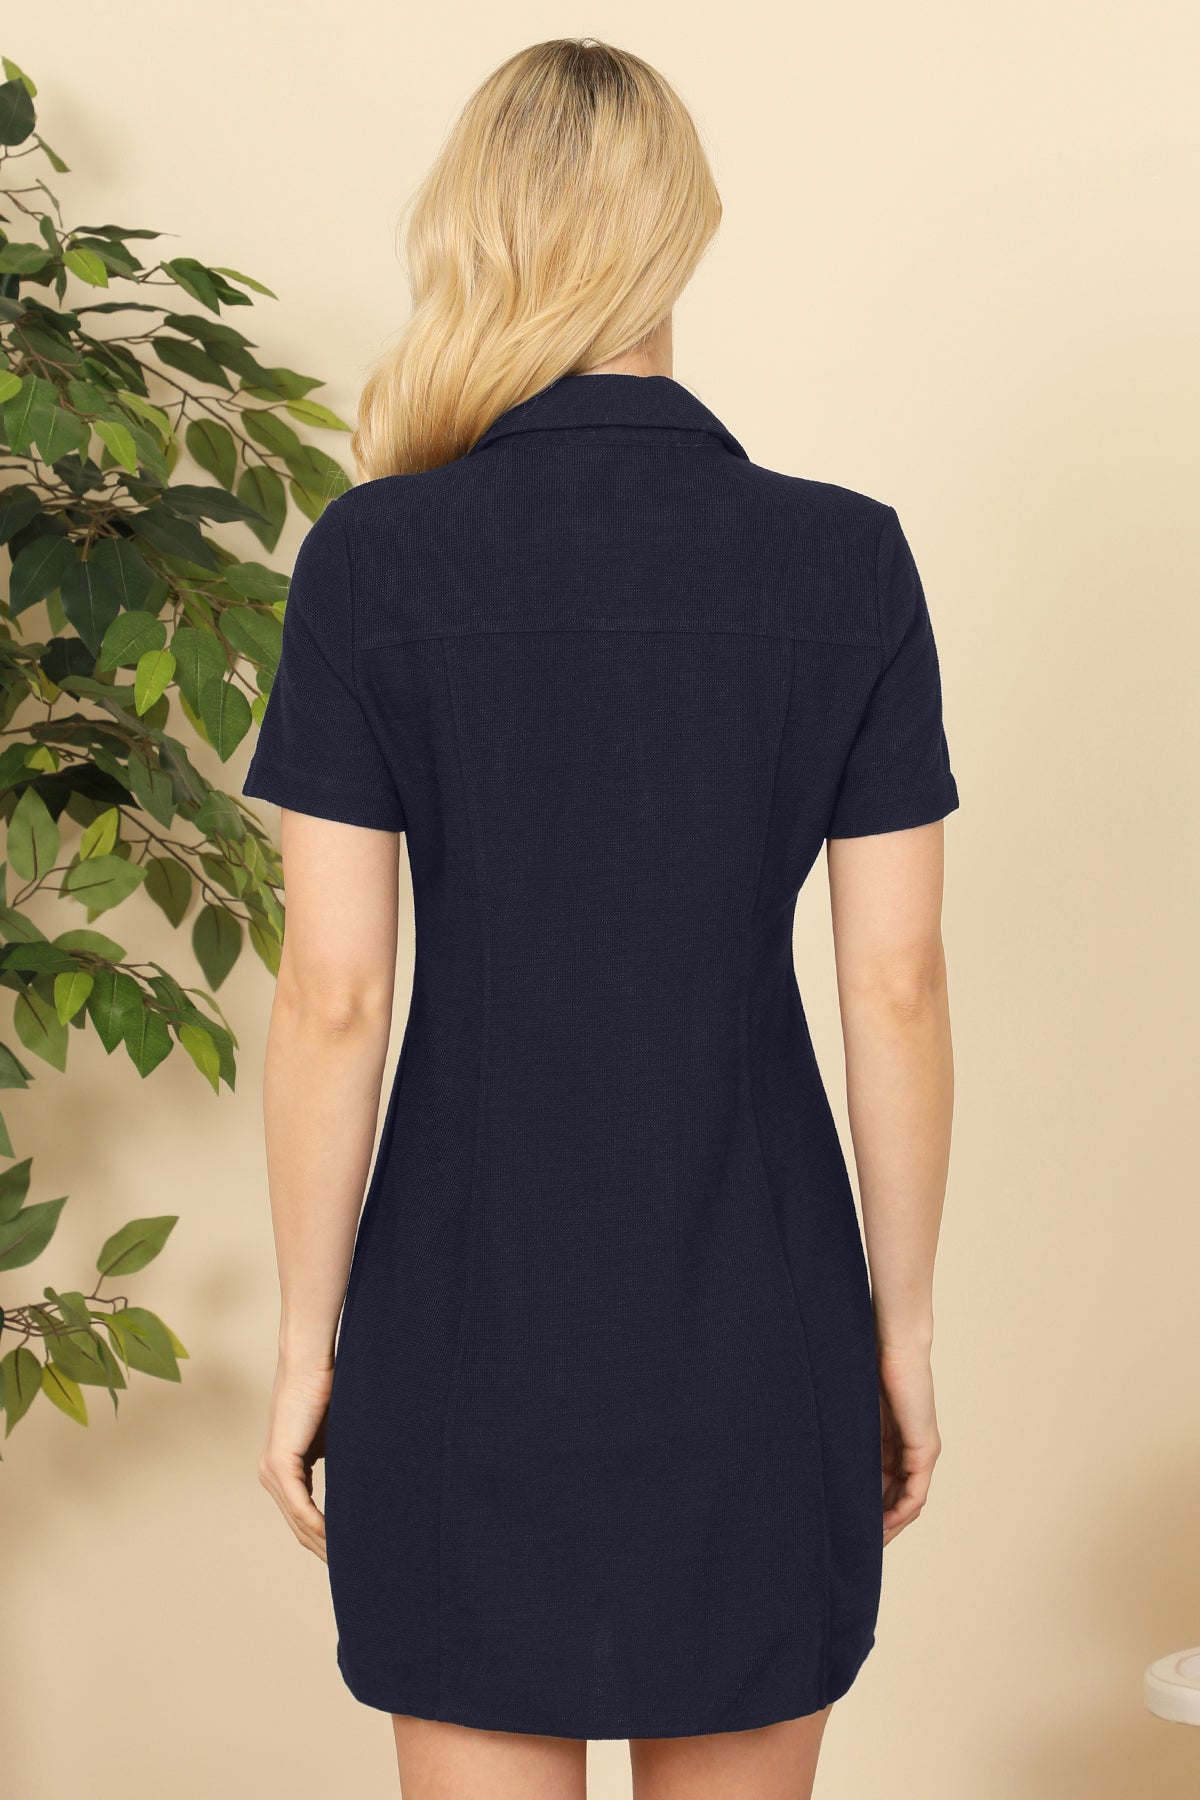 NAVY BUTTON DETAIL FRONT POCKET MINI DRESS 2-2-1  (NOW $5.75 ONLY!)